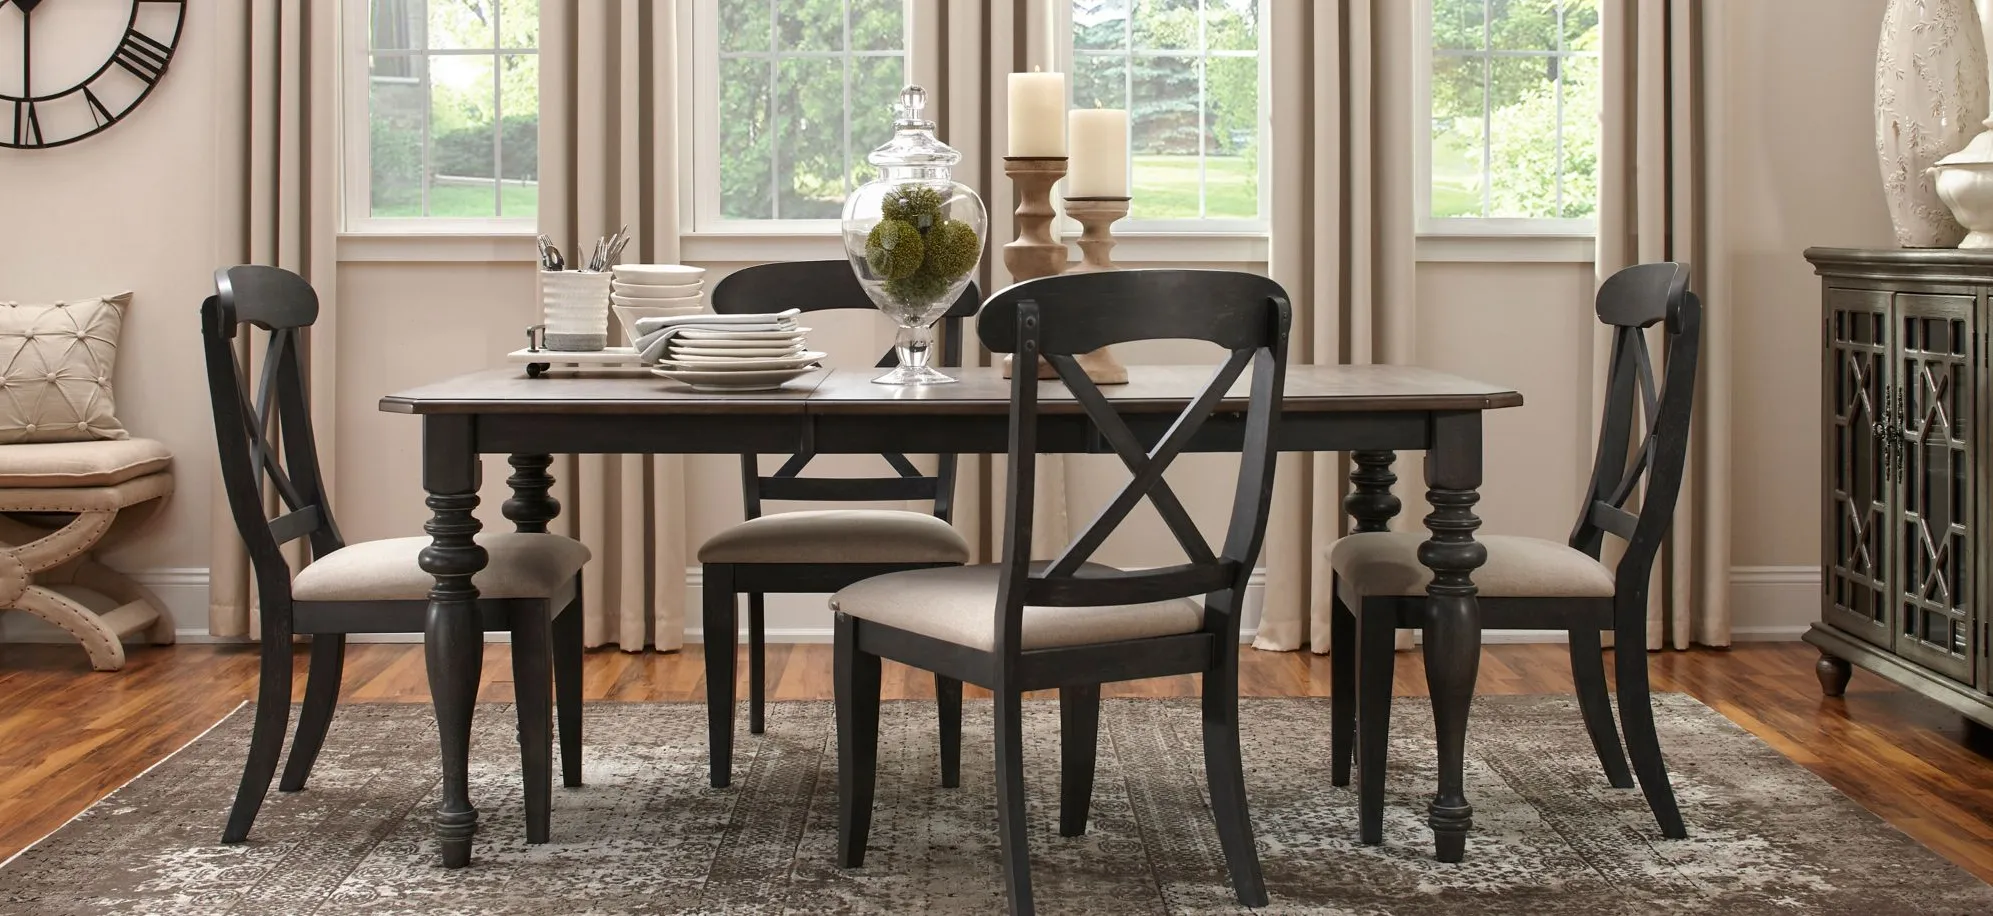 Charleston 5-pc. Dining Set in Slate w/ Weathered Pine Finish by Liberty Furniture